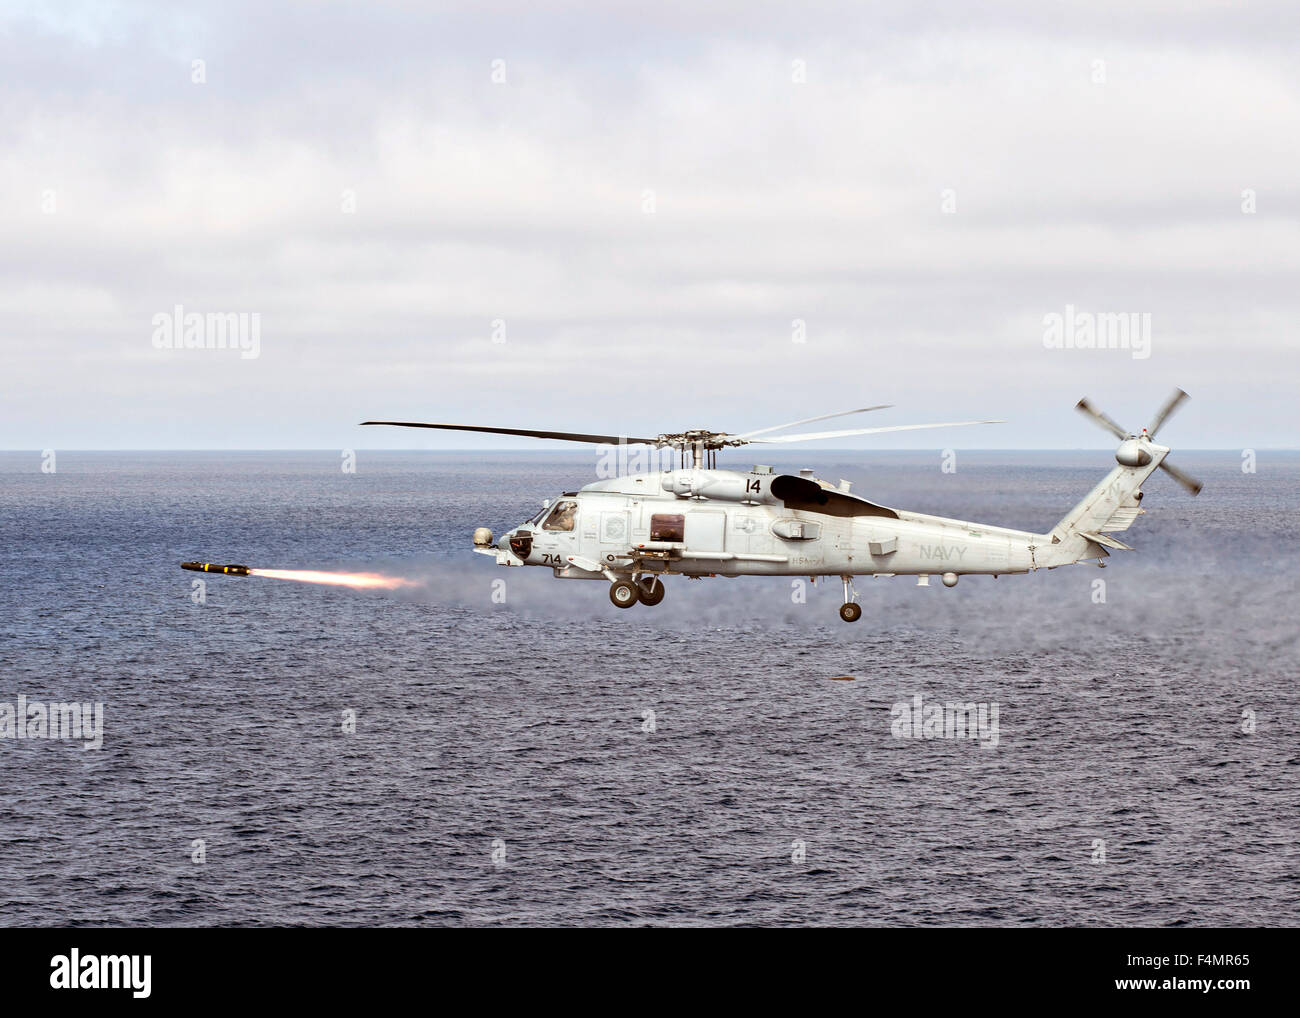 US Navy MH-60R Sea Hawk helicopter fires an AGM-114 Hellfire missile during a training exercise October 14, 2015 in the Pacific Ocean. Stock Photo